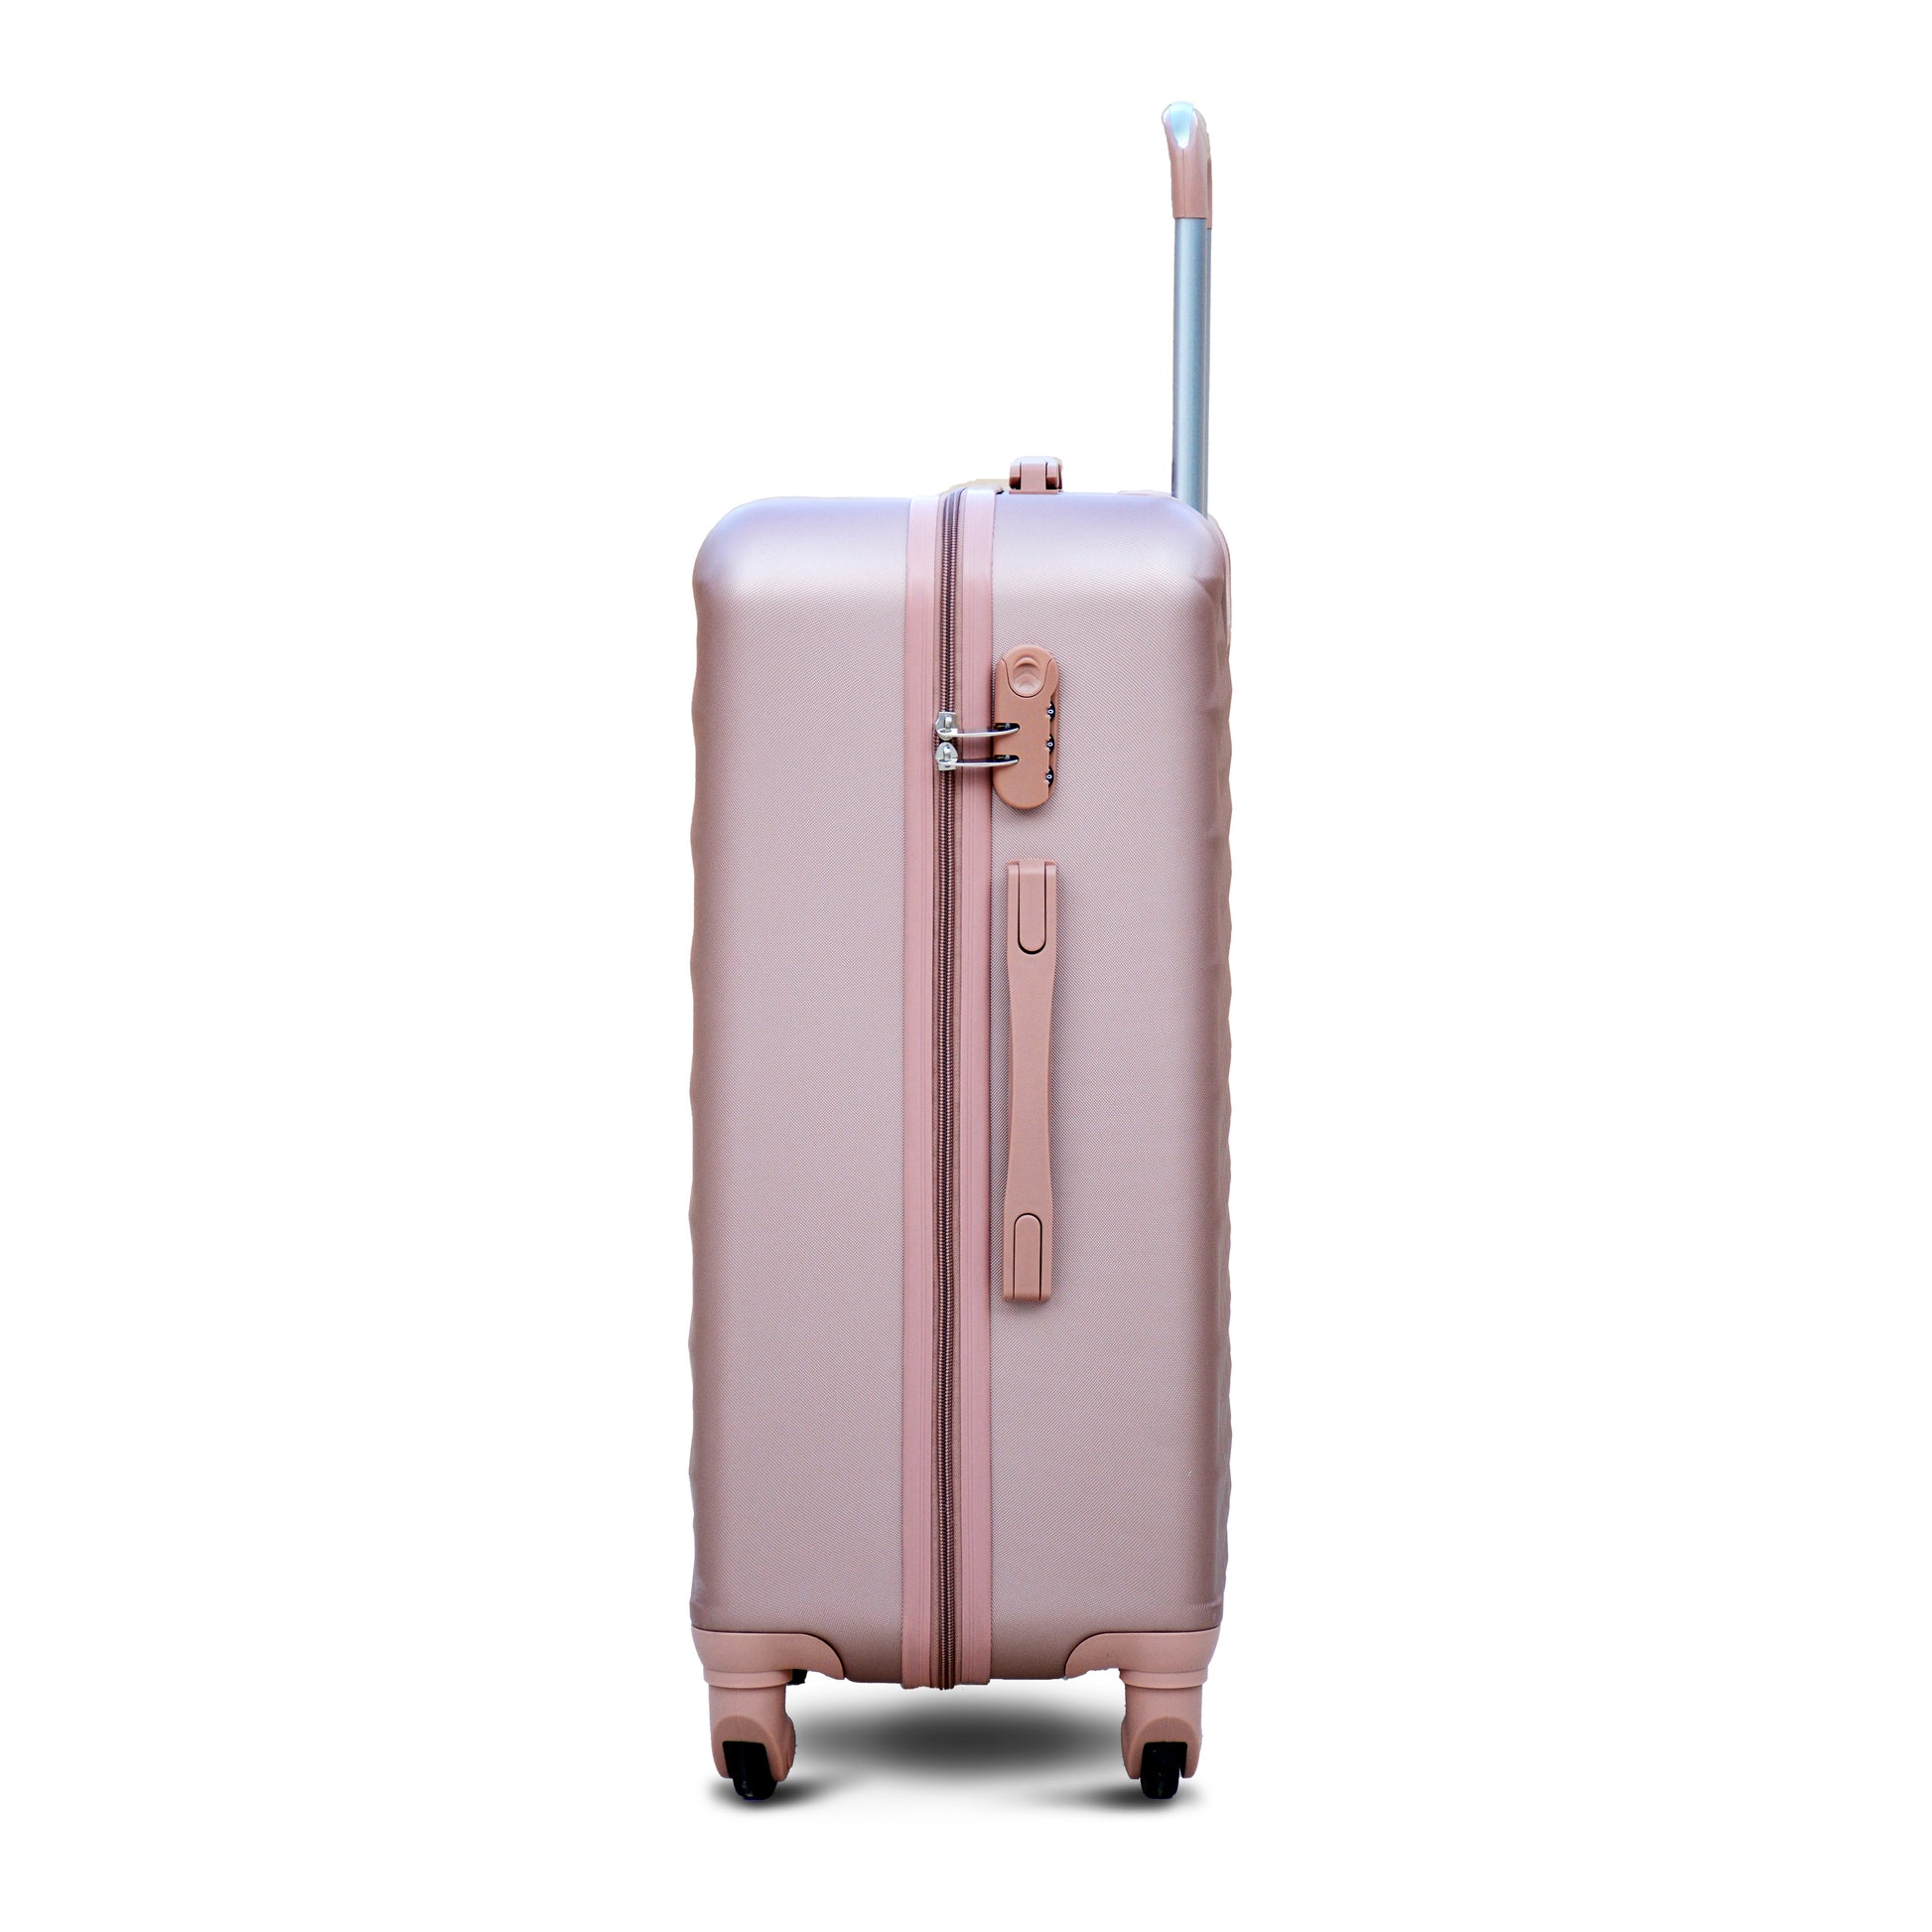 Lightweight ABS Luggage | Hard Case Trolley Bag | 4 Pcs Set 7” 20” 24” 28 Inches | Diamond Cut Rose Gold